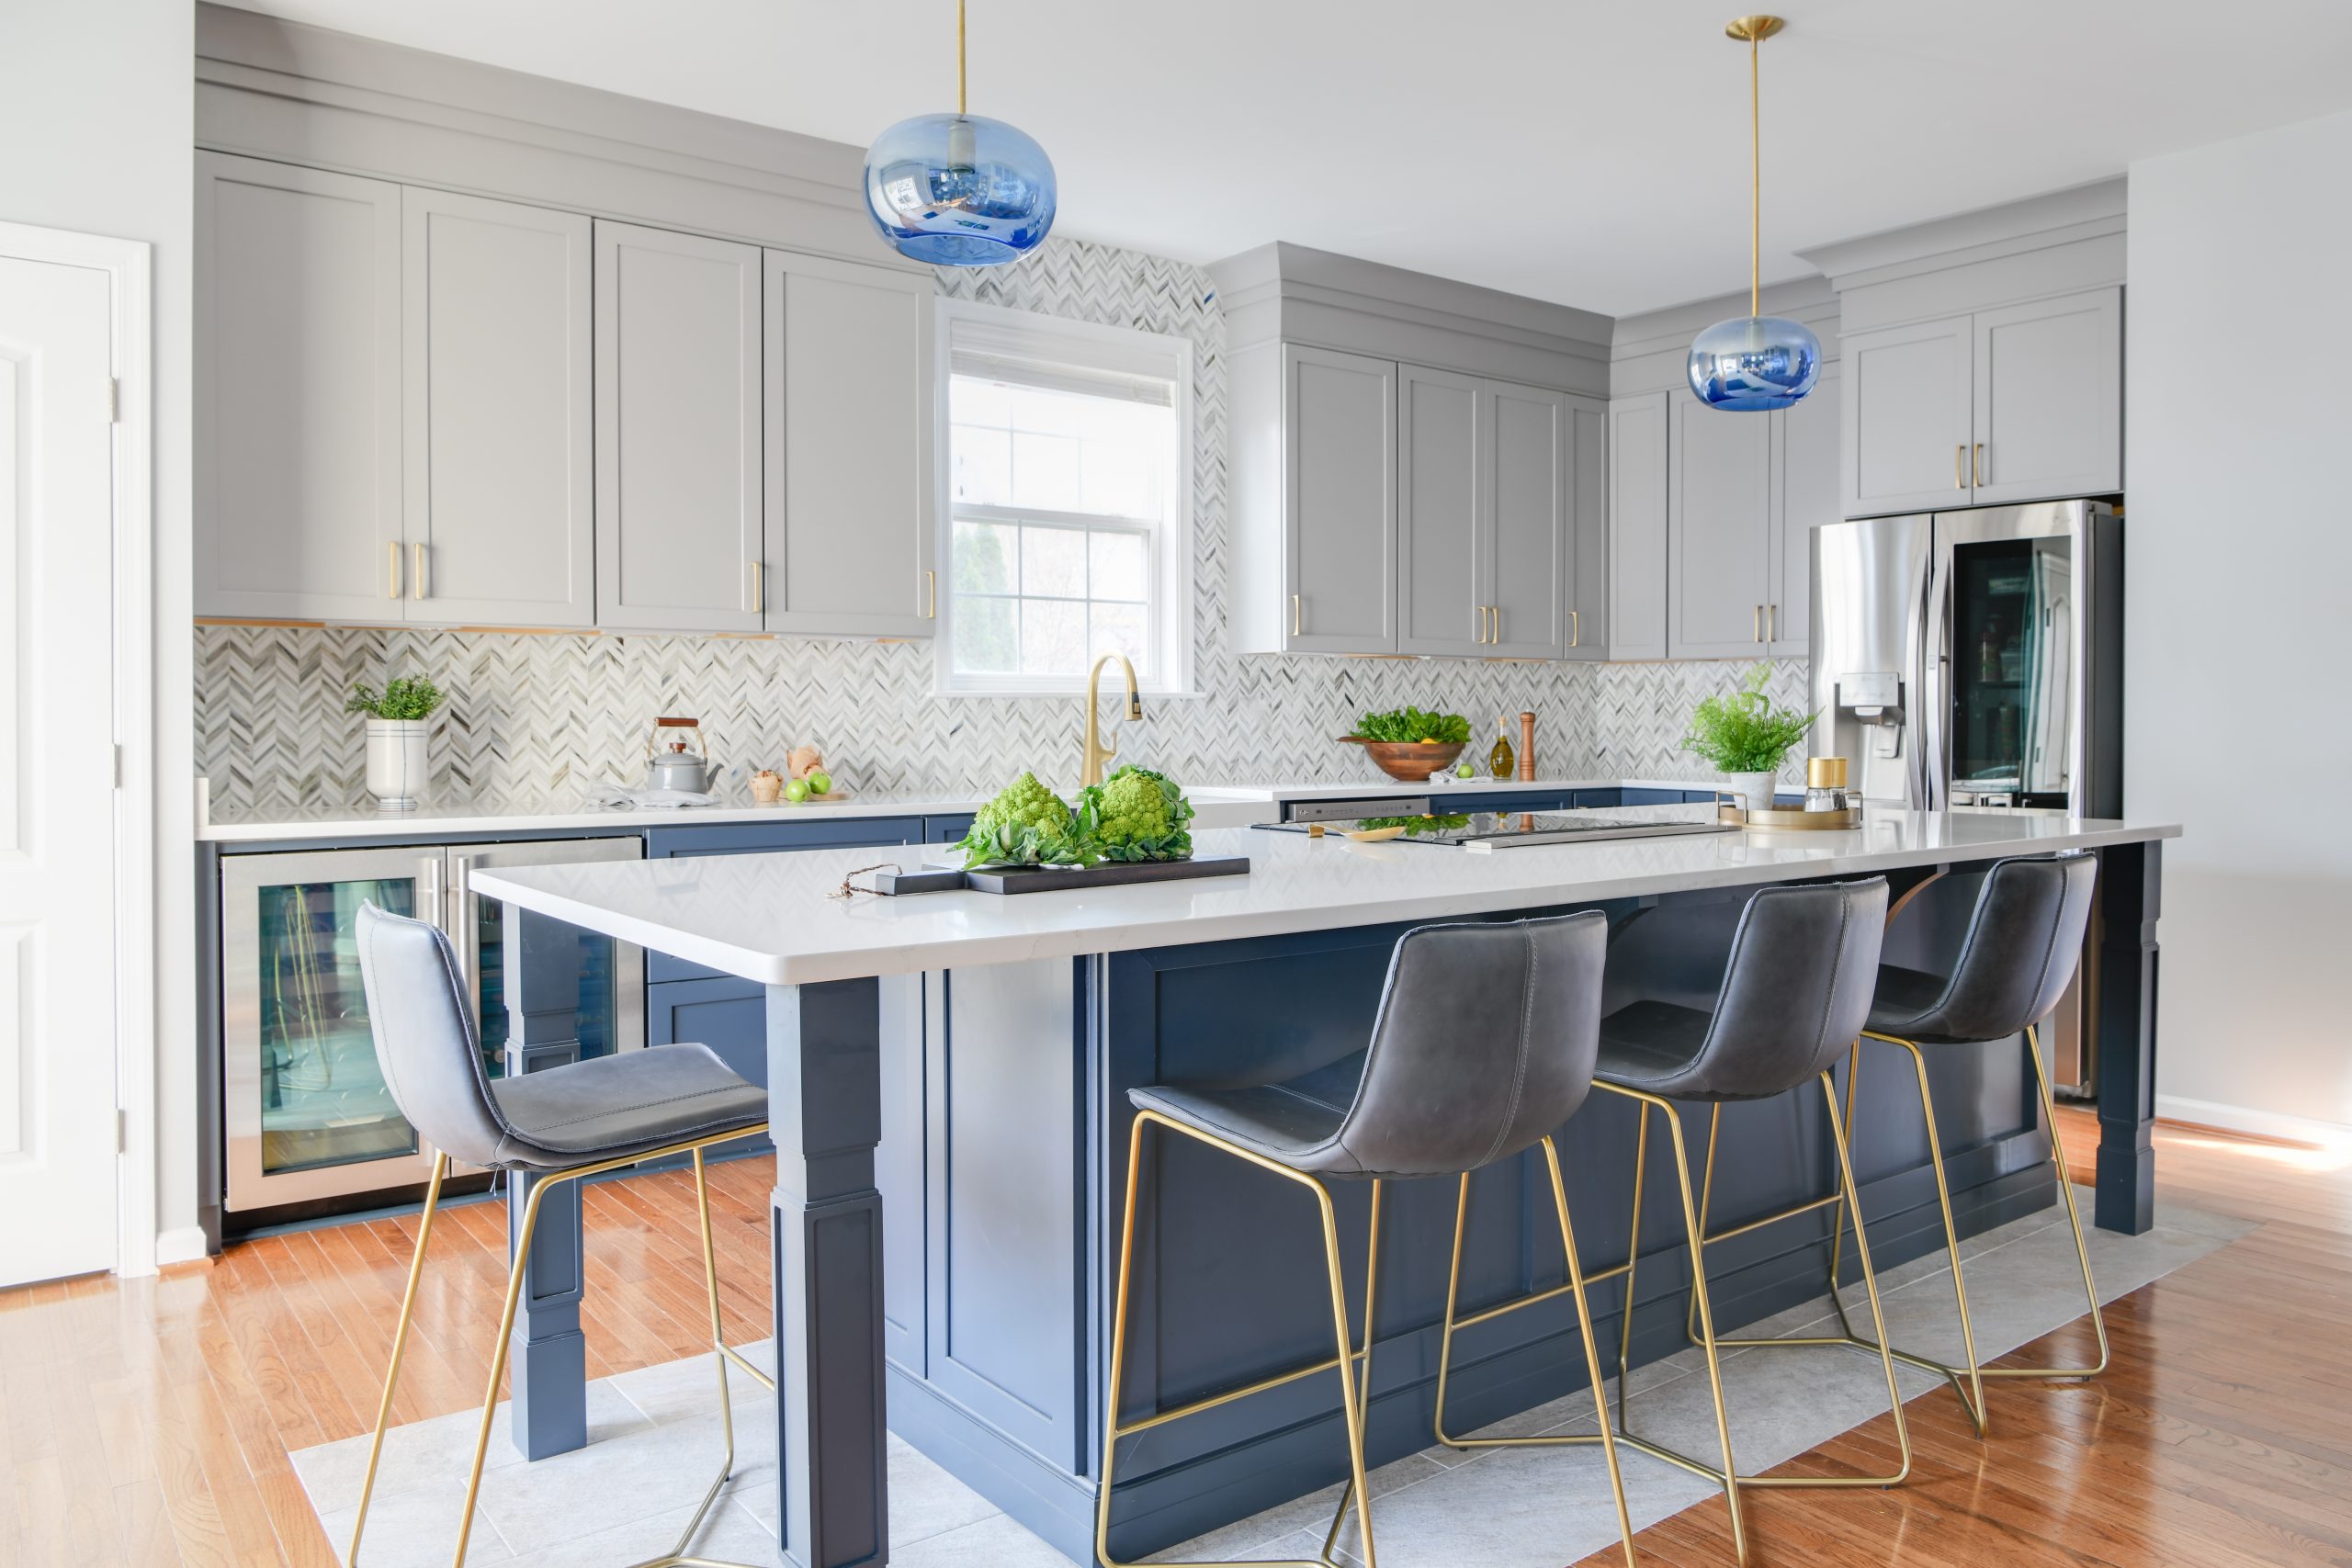 Photo of a kitchen design project in Ashburn VA featuirng a custom island with seating for six